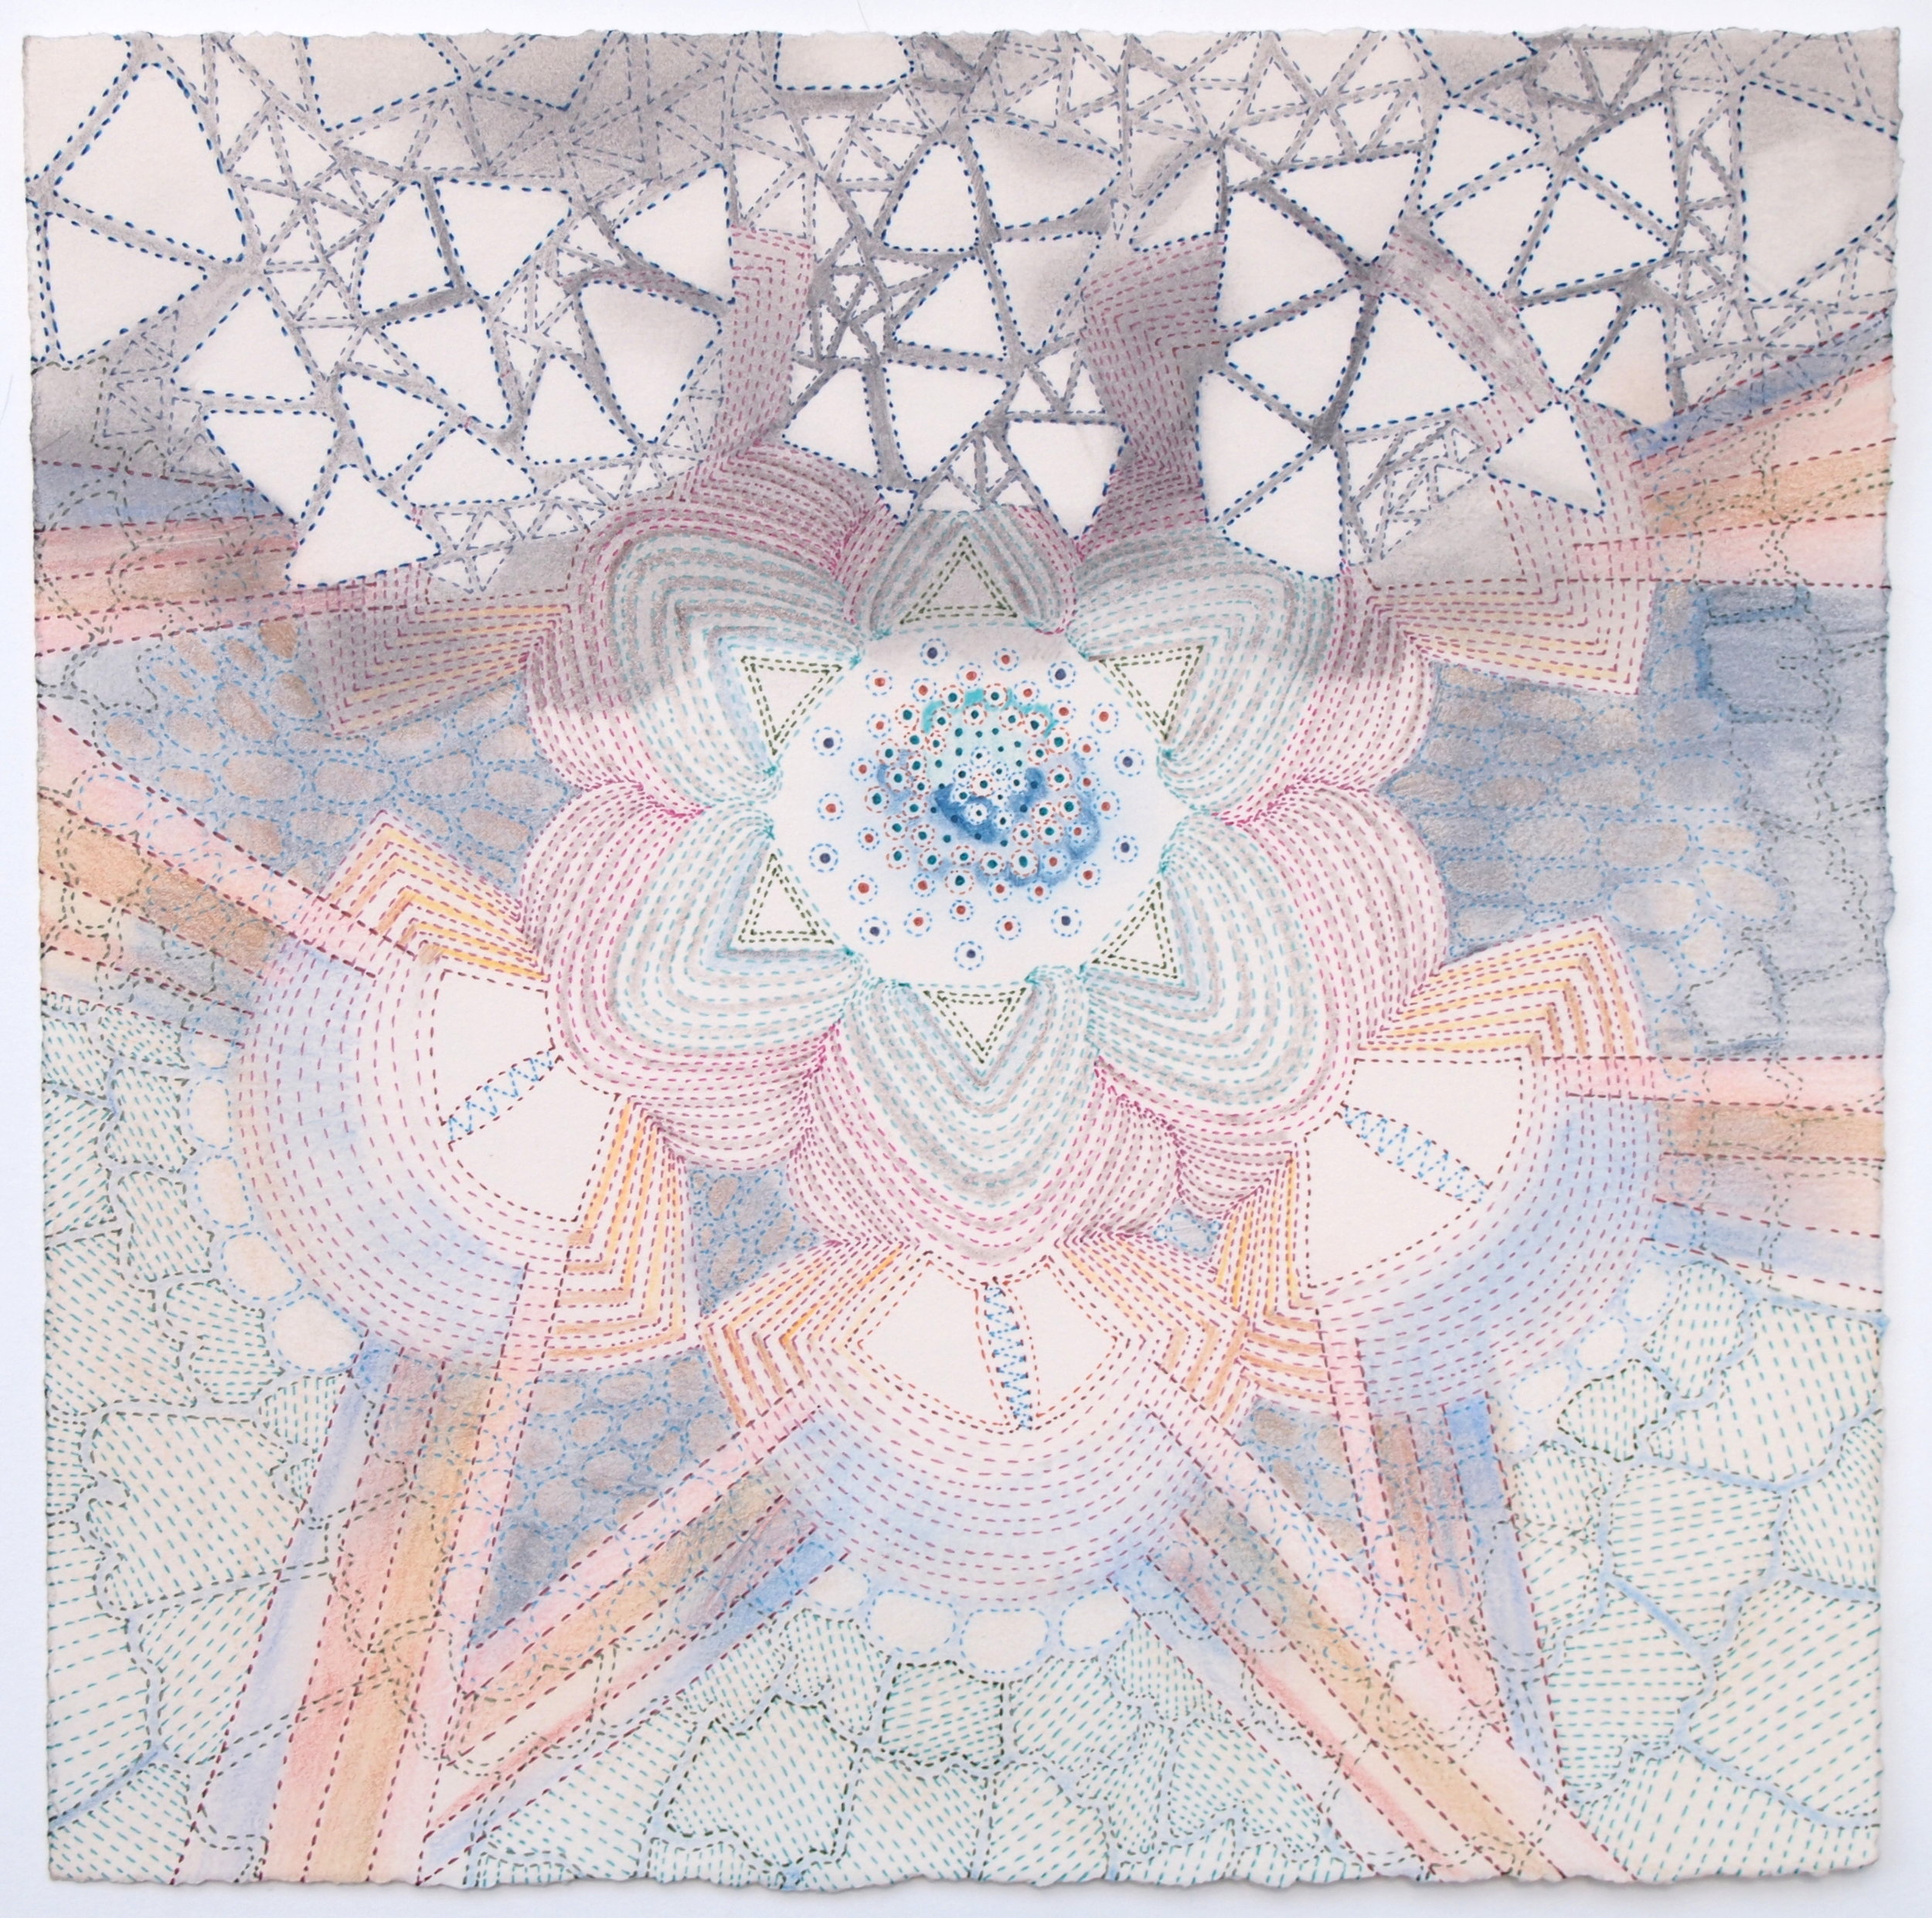 Crystallizing Almond Mushroom, ink, colored pencil and graphite on paper, 10 x 10 inches.